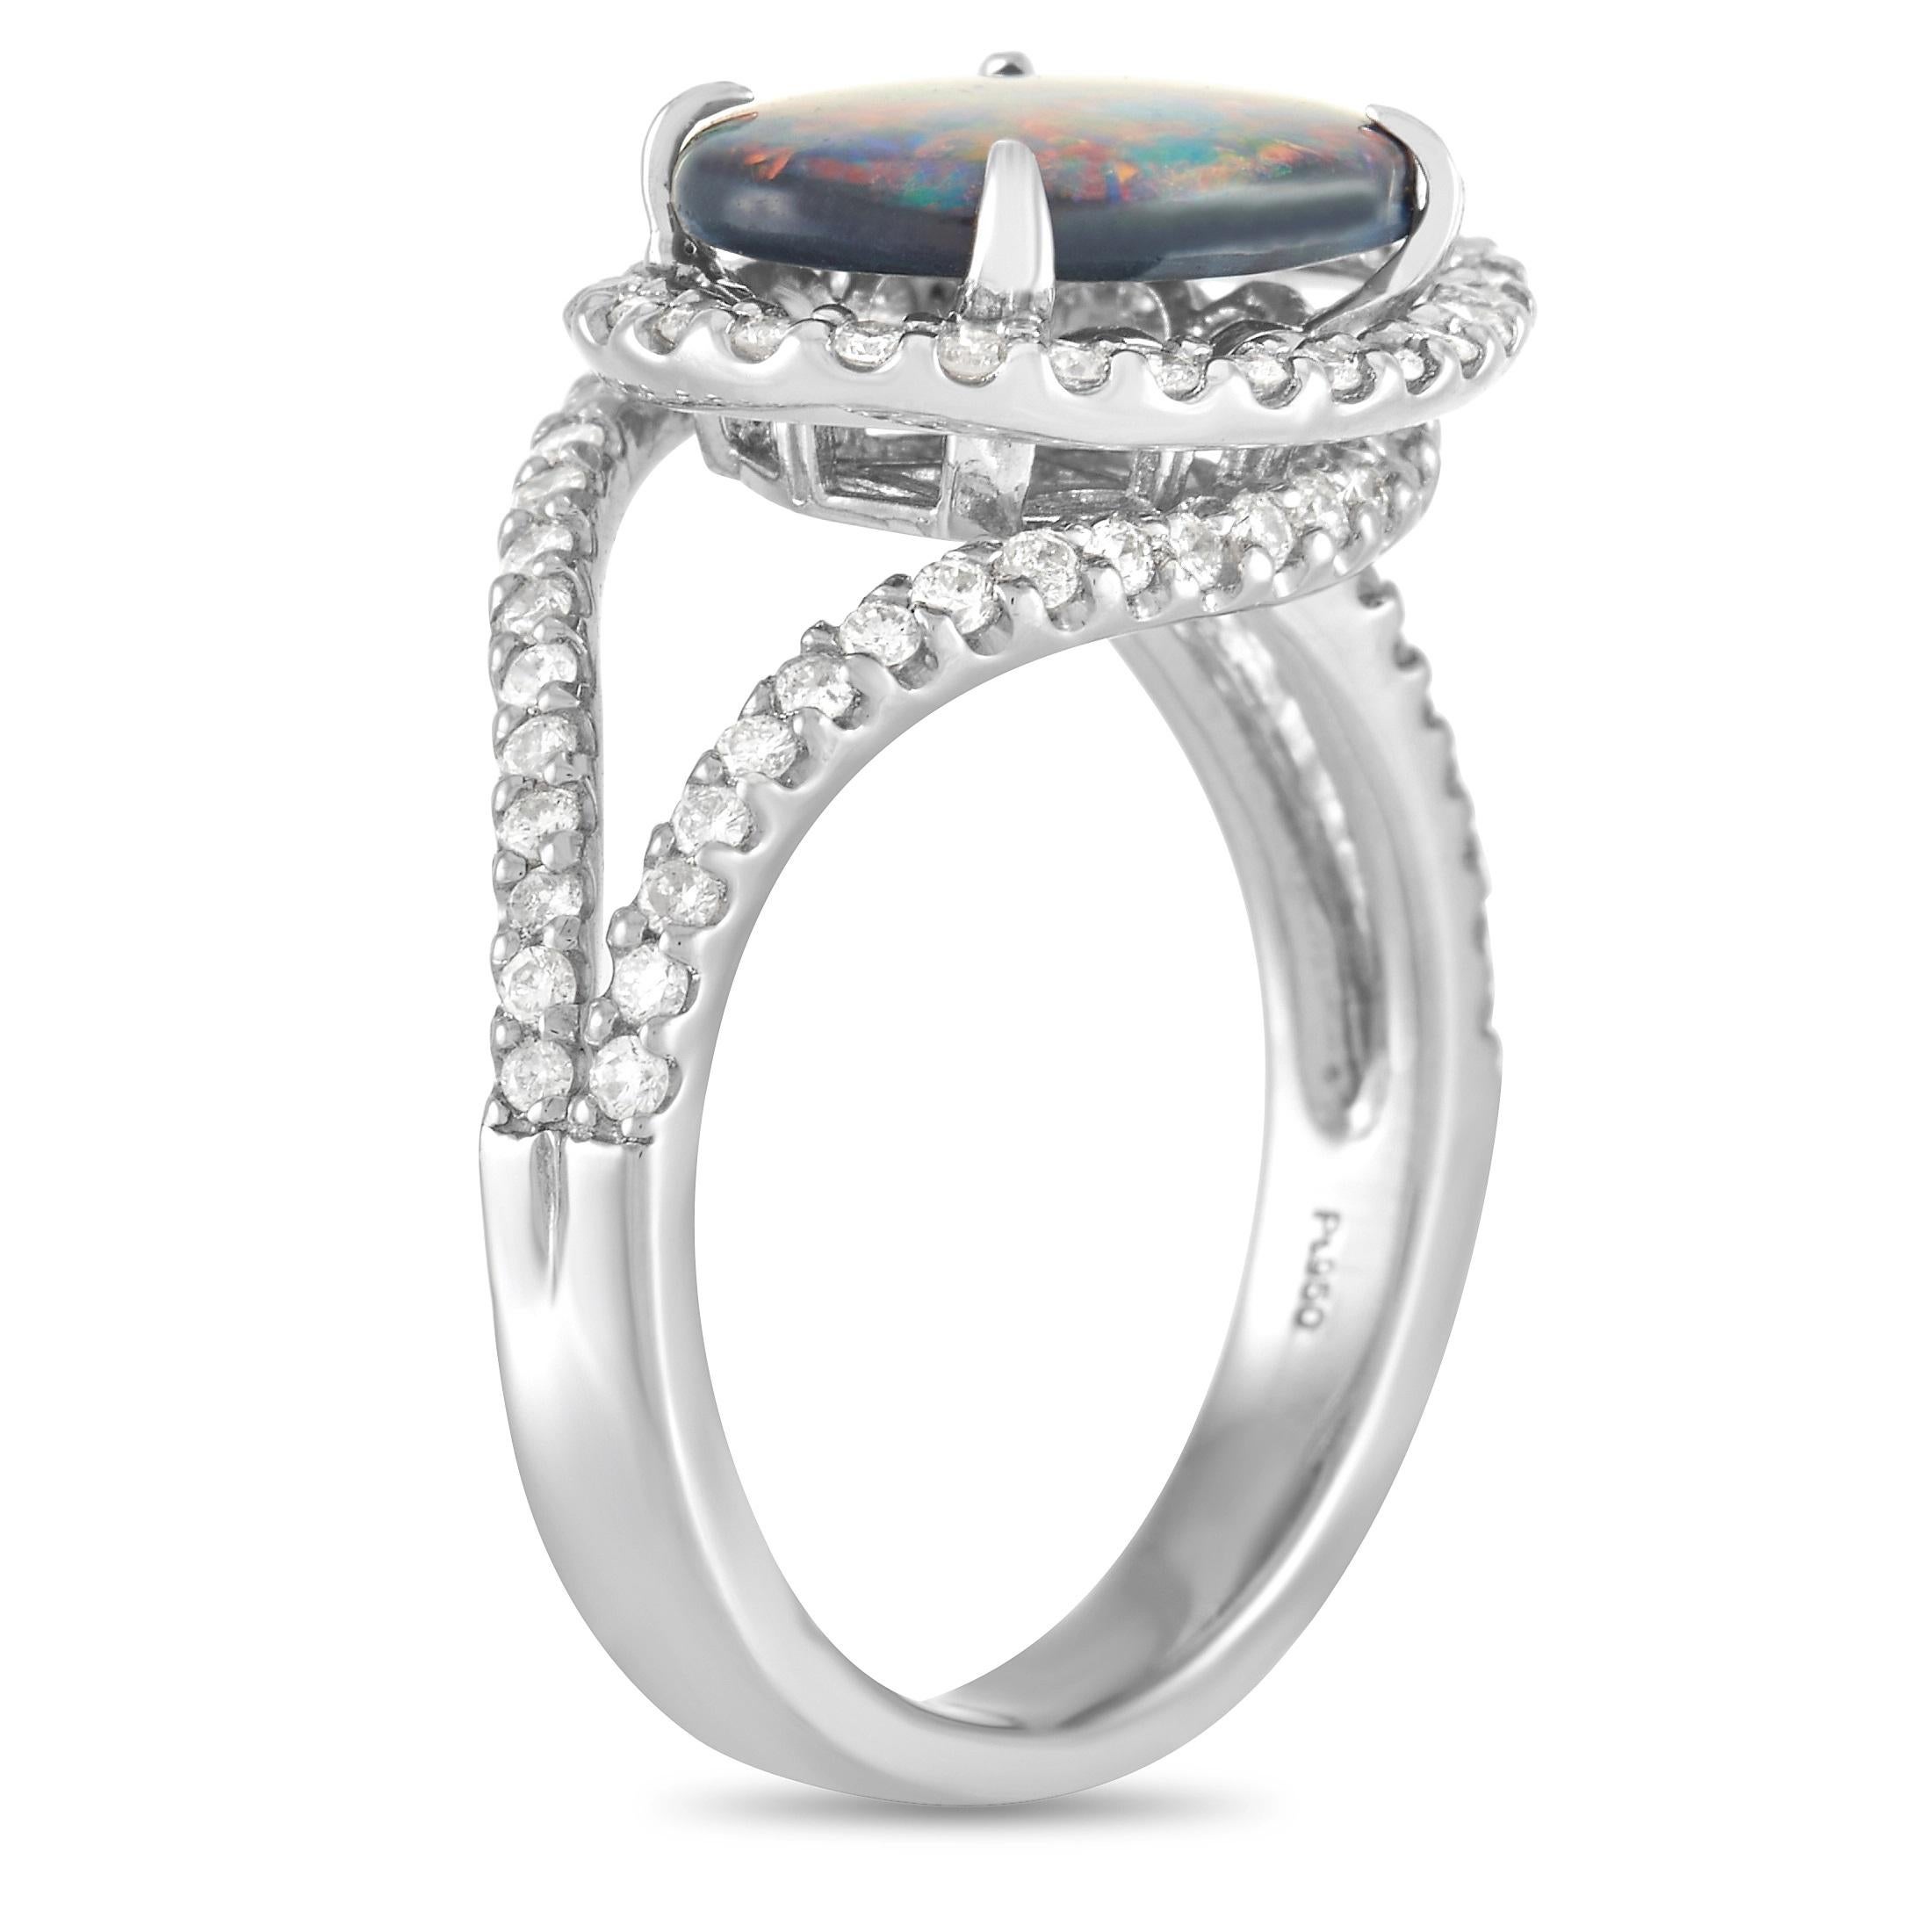 This exciting style pairs the fiery color of an elegant opal with the classic sparkle of traditional diamonds. At the center of this ring’s creative platinum setting, you’ll find an oval-shaped 1.88 carat opal that features a captivating color